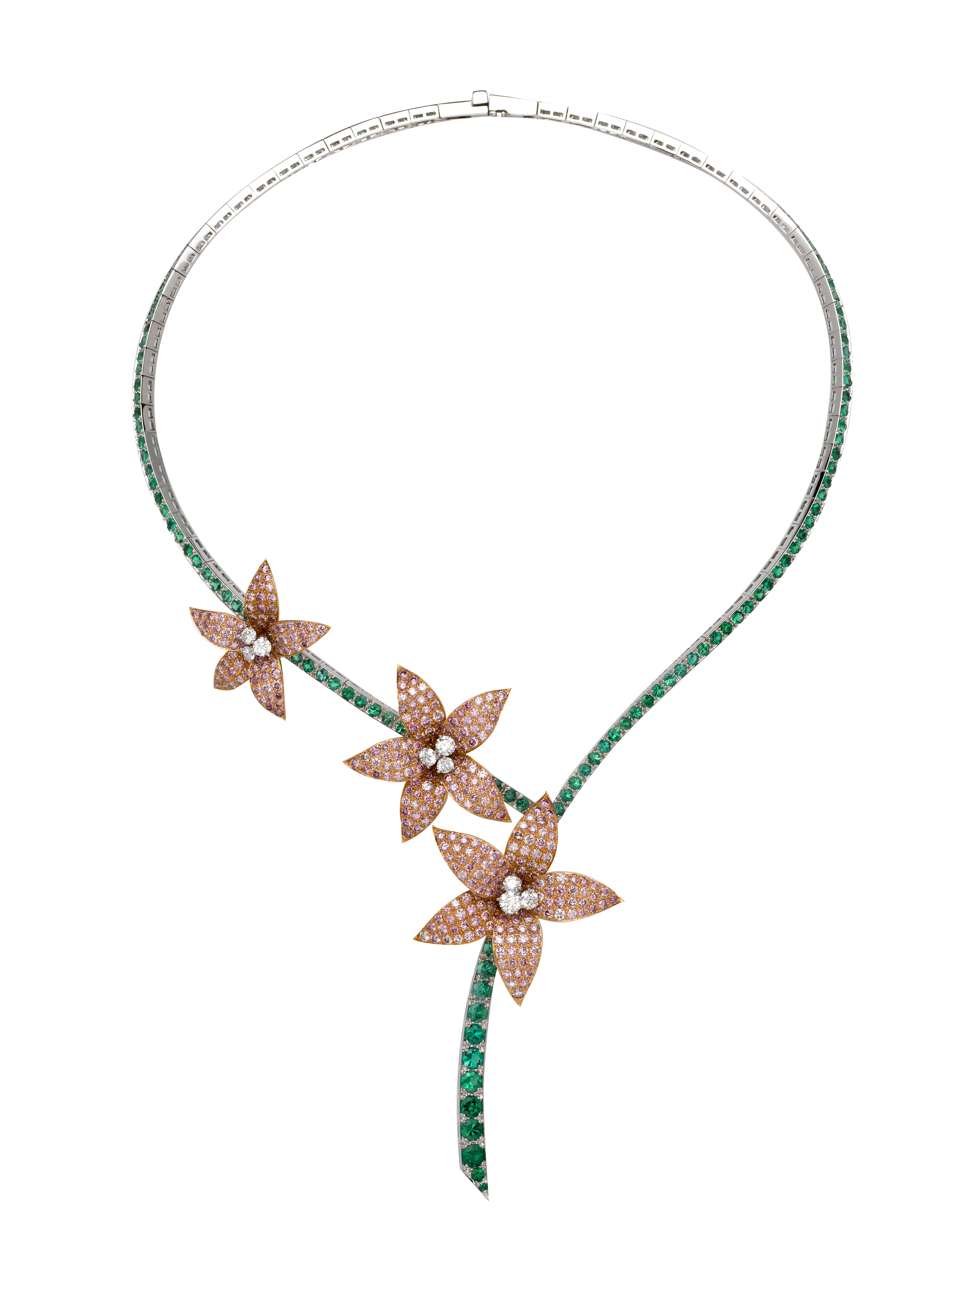 The sparkling emeralds, pink and white diamonds on the 18 ct gold necklace are complemented with an irregular silhouette. Price on request